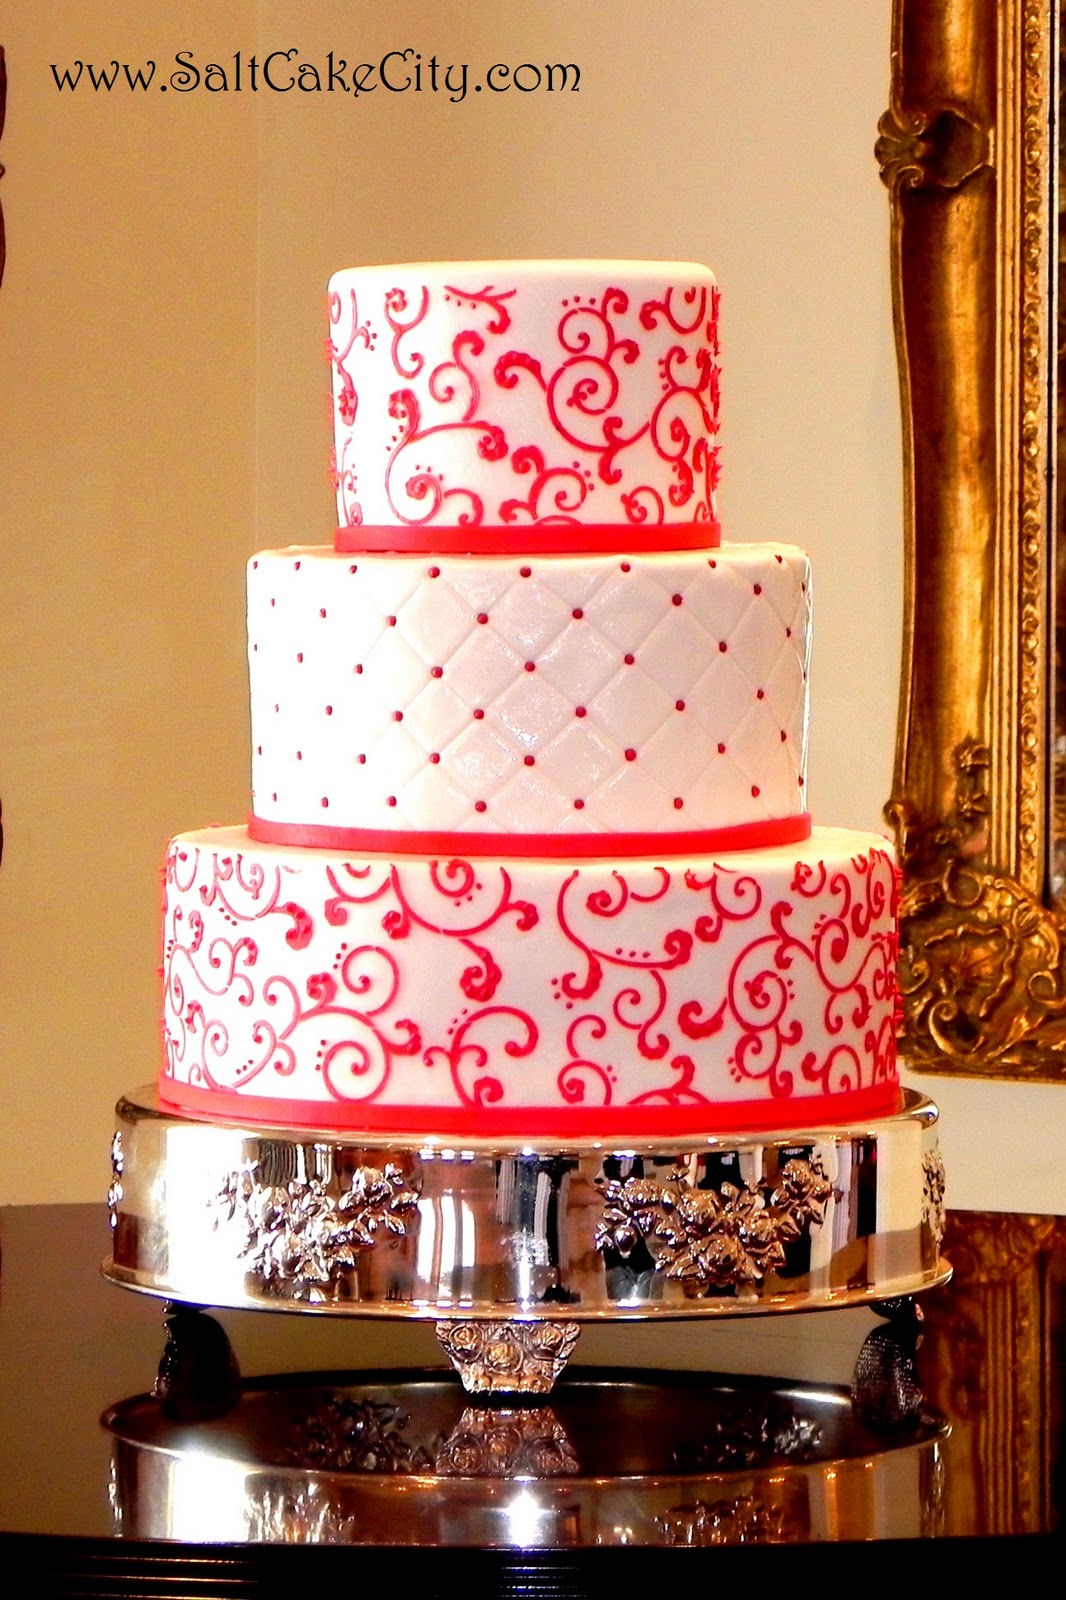 buttercream wedding cake images Posted by Jennifer at 8:39 PM 0comments Links to this post